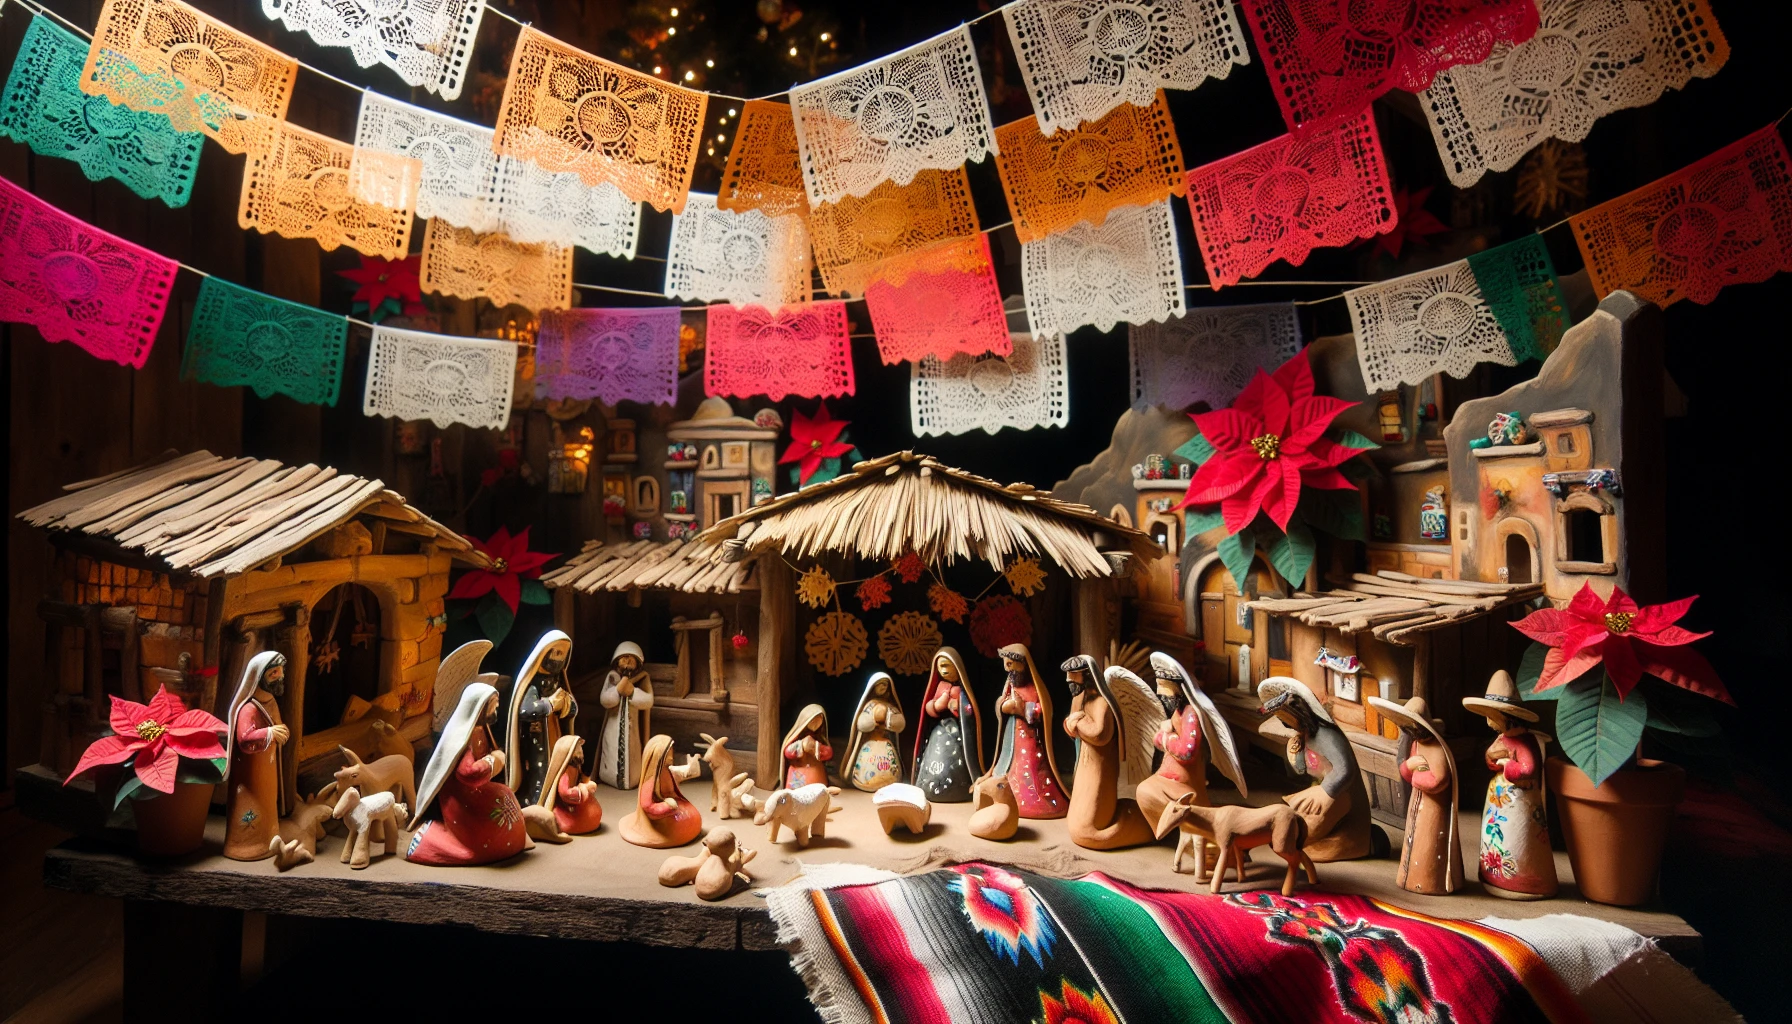 Nativity scene with traditional Mexican decorations christmas in mexico